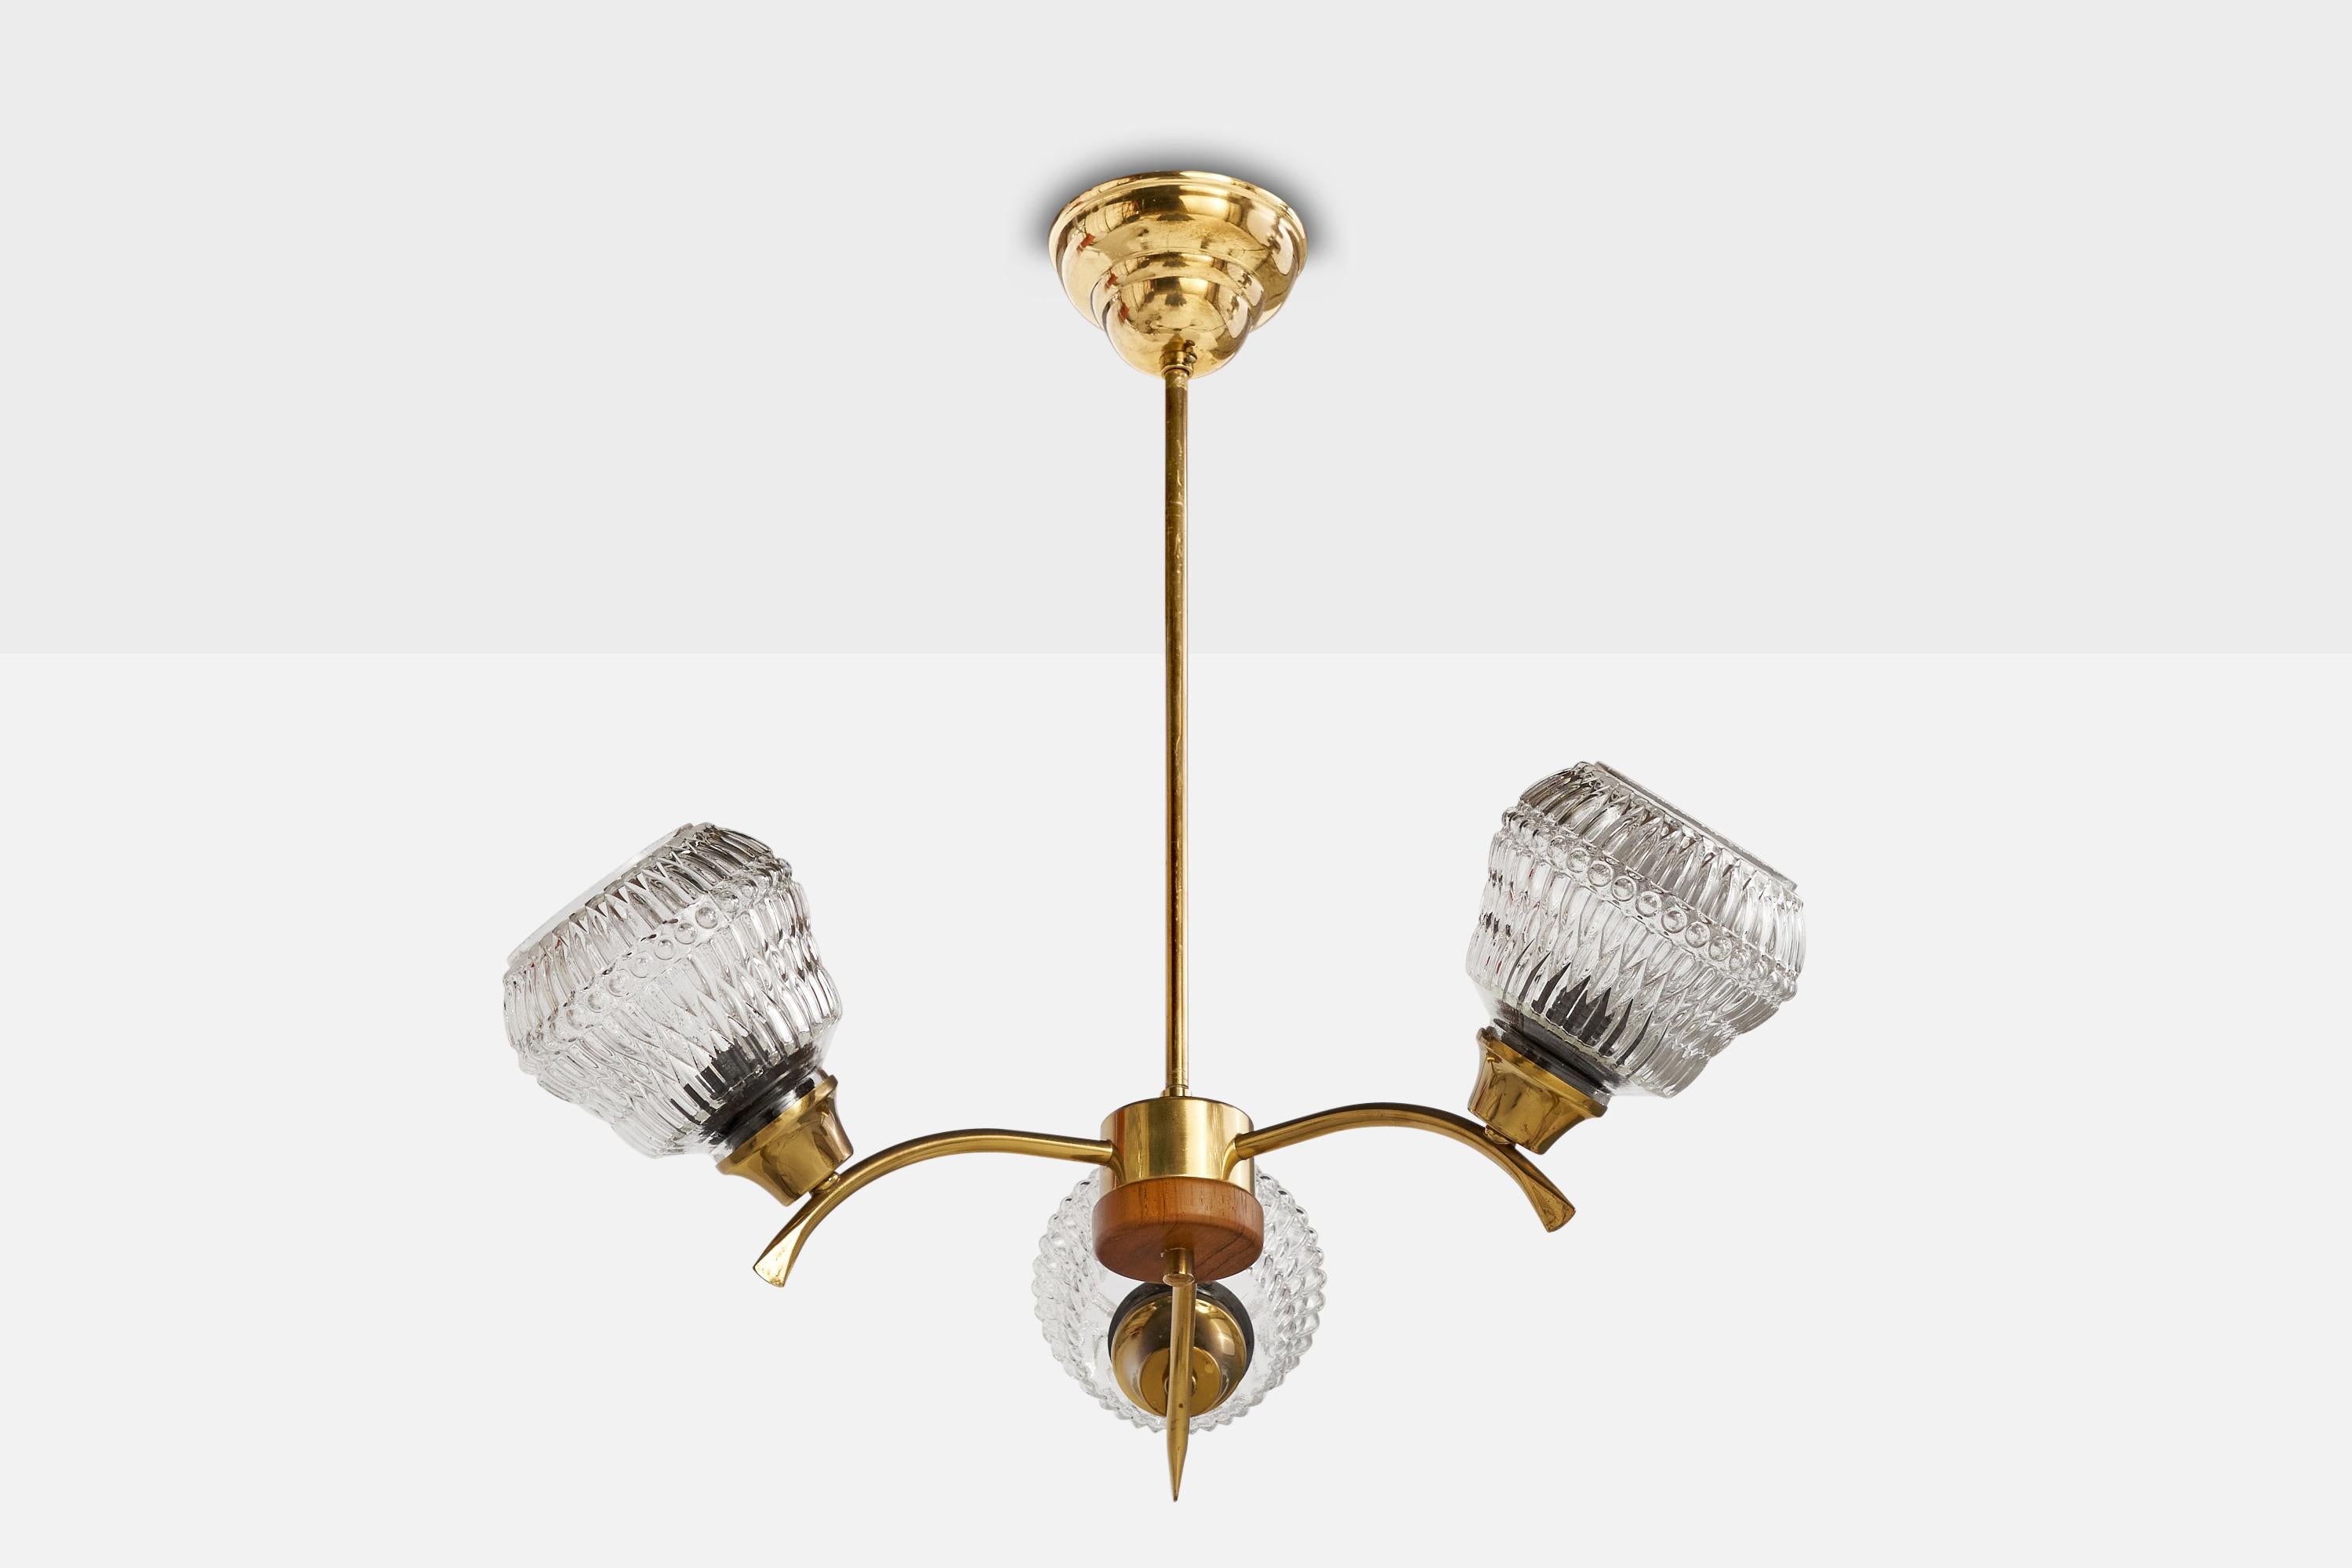 A brass, teak and faceted glass chandelier designed and produced in Sweden, 1950s.

Dimensions of canopy (inches): 2.5” H x 4.25”  Diameter
Socket takes standard E-26 bulbs. 3 sockets.There is no maximum wattage stated on the fixture. All lighting